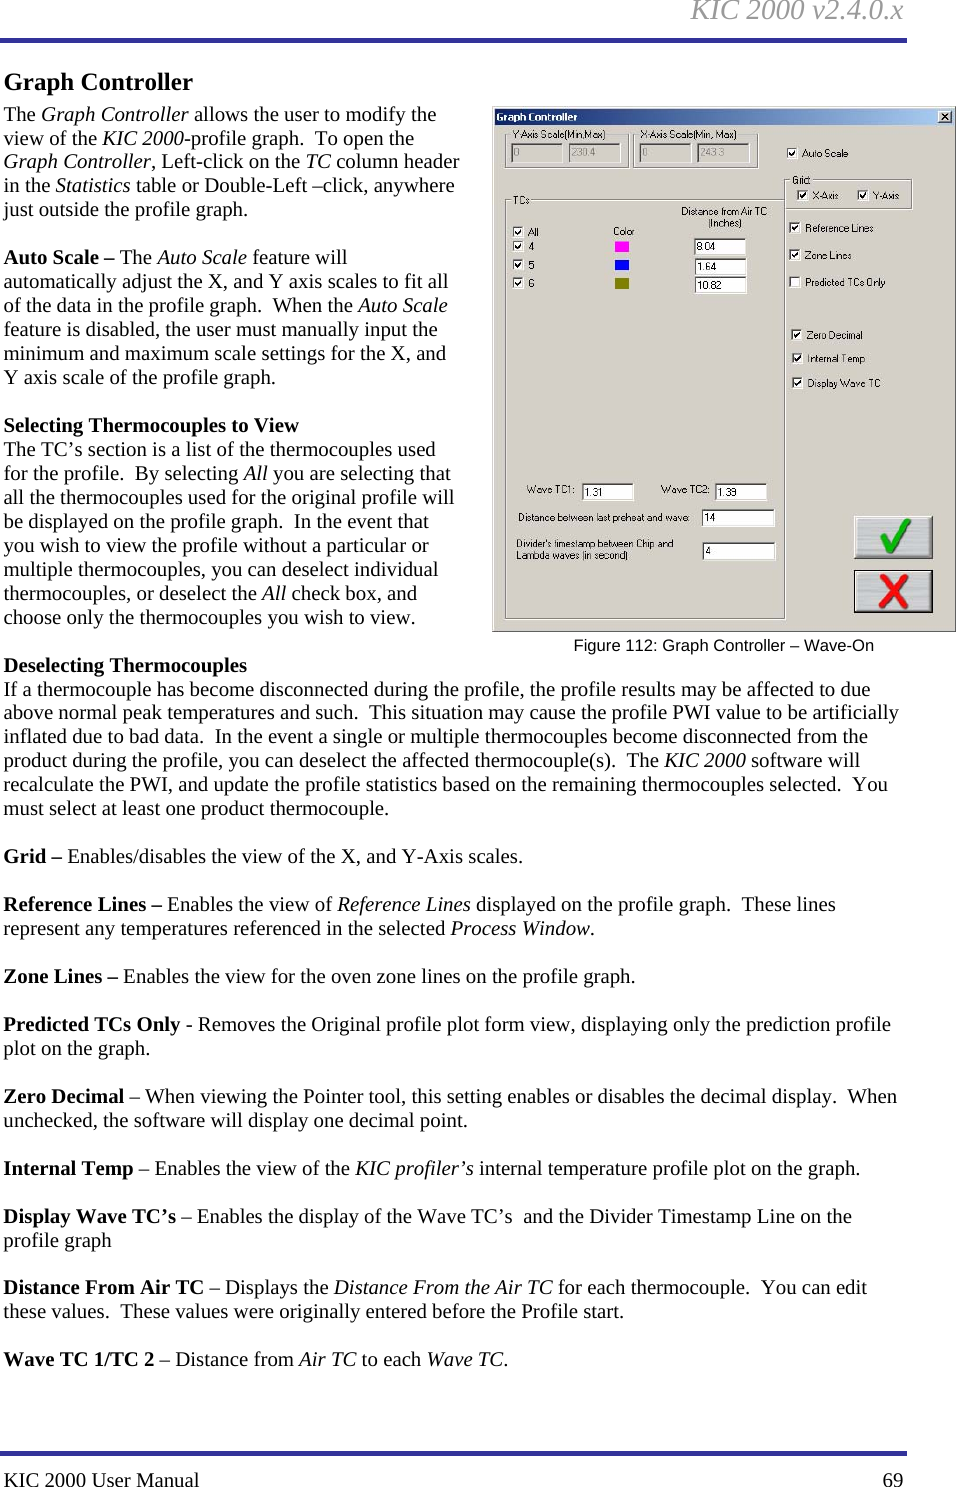 KIC 2000 v2.4.0.x KIC 2000 User Manual    69 Graph Controller The Graph Controller allows the user to modify the view of the KIC 2000-profile graph.  To open the Graph Controller, Left-click on the TC column header in the Statistics table or Double-Left –click, anywhere just outside the profile graph.  Auto Scale – The Auto Scale feature will automatically adjust the X, and Y axis scales to fit all of the data in the profile graph.  When the Auto Scale feature is disabled, the user must manually input the minimum and maximum scale settings for the X, and Y axis scale of the profile graph.  Selecting Thermocouples to View The TC’s section is a list of the thermocouples used for the profile.  By selecting All you are selecting that all the thermocouples used for the original profile will be displayed on the profile graph.  In the event that you wish to view the profile without a particular or multiple thermocouples, you can deselect individual thermocouples, or deselect the All check box, and choose only the thermocouples you wish to view.  Deselecting Thermocouples If a thermocouple has become disconnected during the profile, the profile results may be affected to due above normal peak temperatures and such.  This situation may cause the profile PWI value to be artificially inflated due to bad data.  In the event a single or multiple thermocouples become disconnected from the product during the profile, you can deselect the affected thermocouple(s).  The KIC 2000 software will recalculate the PWI, and update the profile statistics based on the remaining thermocouples selected.  You must select at least one product thermocouple.  Grid – Enables/disables the view of the X, and Y-Axis scales.  Reference Lines – Enables the view of Reference Lines displayed on the profile graph.  These lines represent any temperatures referenced in the selected Process Window.  Zone Lines – Enables the view for the oven zone lines on the profile graph.  Predicted TCs Only - Removes the Original profile plot form view, displaying only the prediction profile plot on the graph.    Zero Decimal – When viewing the Pointer tool, this setting enables or disables the decimal display.  When unchecked, the software will display one decimal point.  Internal Temp – Enables the view of the KIC profiler’s internal temperature profile plot on the graph.    Display Wave TC’s – Enables the display of the Wave TC’s  and the Divider Timestamp Line on the profile graph  Distance From Air TC – Displays the Distance From the Air TC for each thermocouple.  You can edit these values.  These values were originally entered before the Profile start.  Wave TC 1/TC 2 – Distance from Air TC to each Wave TC.   Figure 112: Graph Controller – Wave-On 